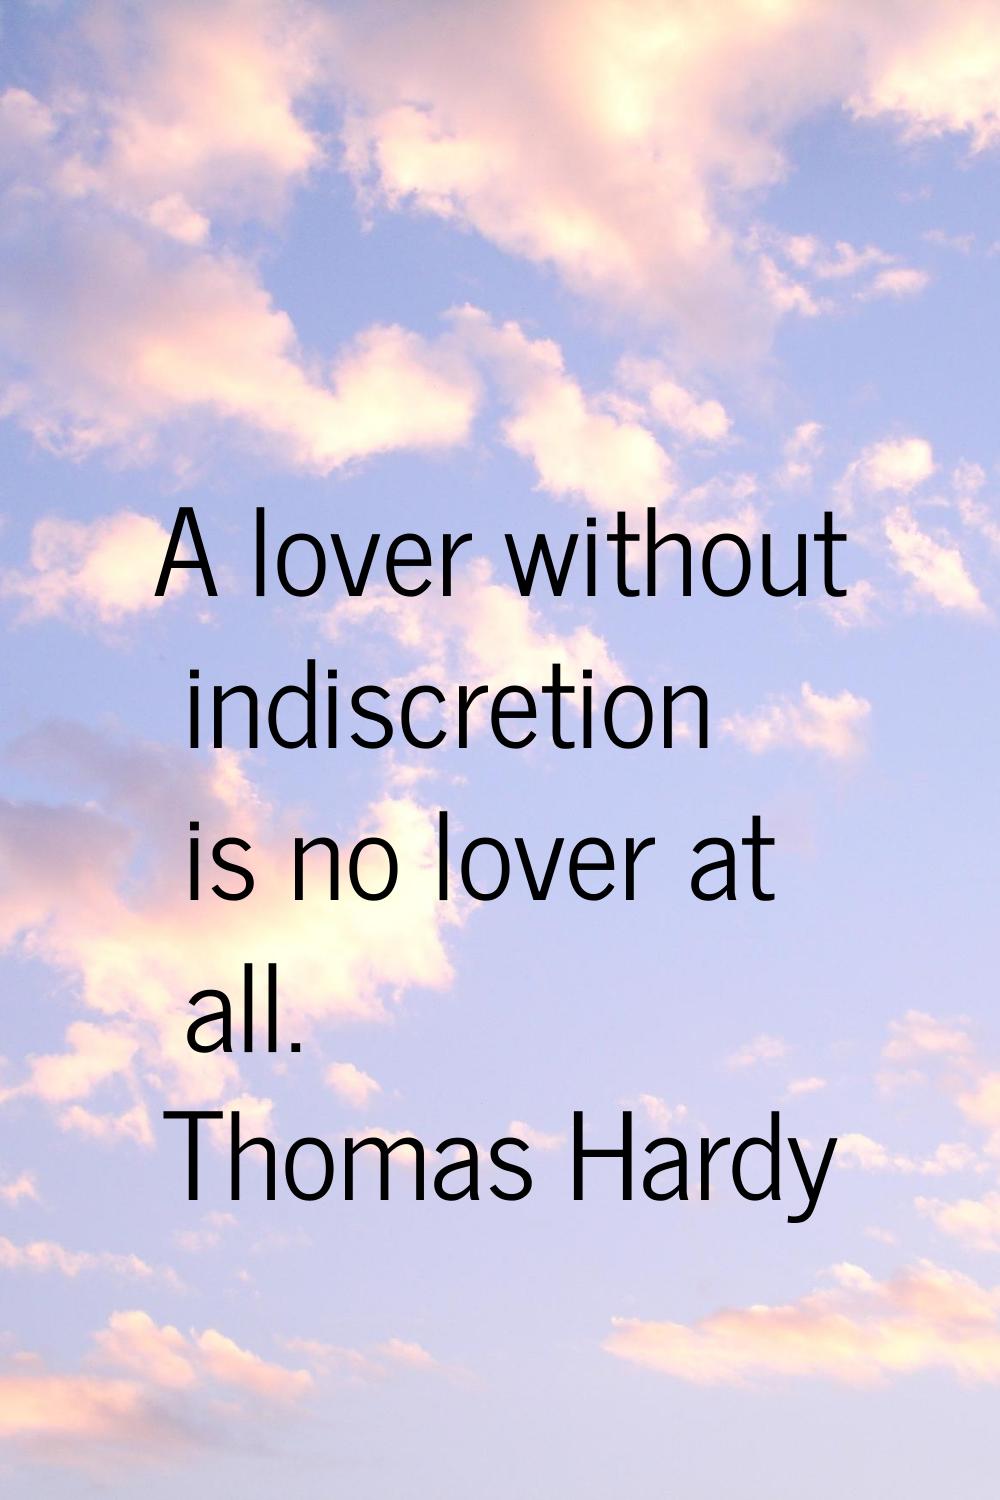 A lover without indiscretion is no lover at all.